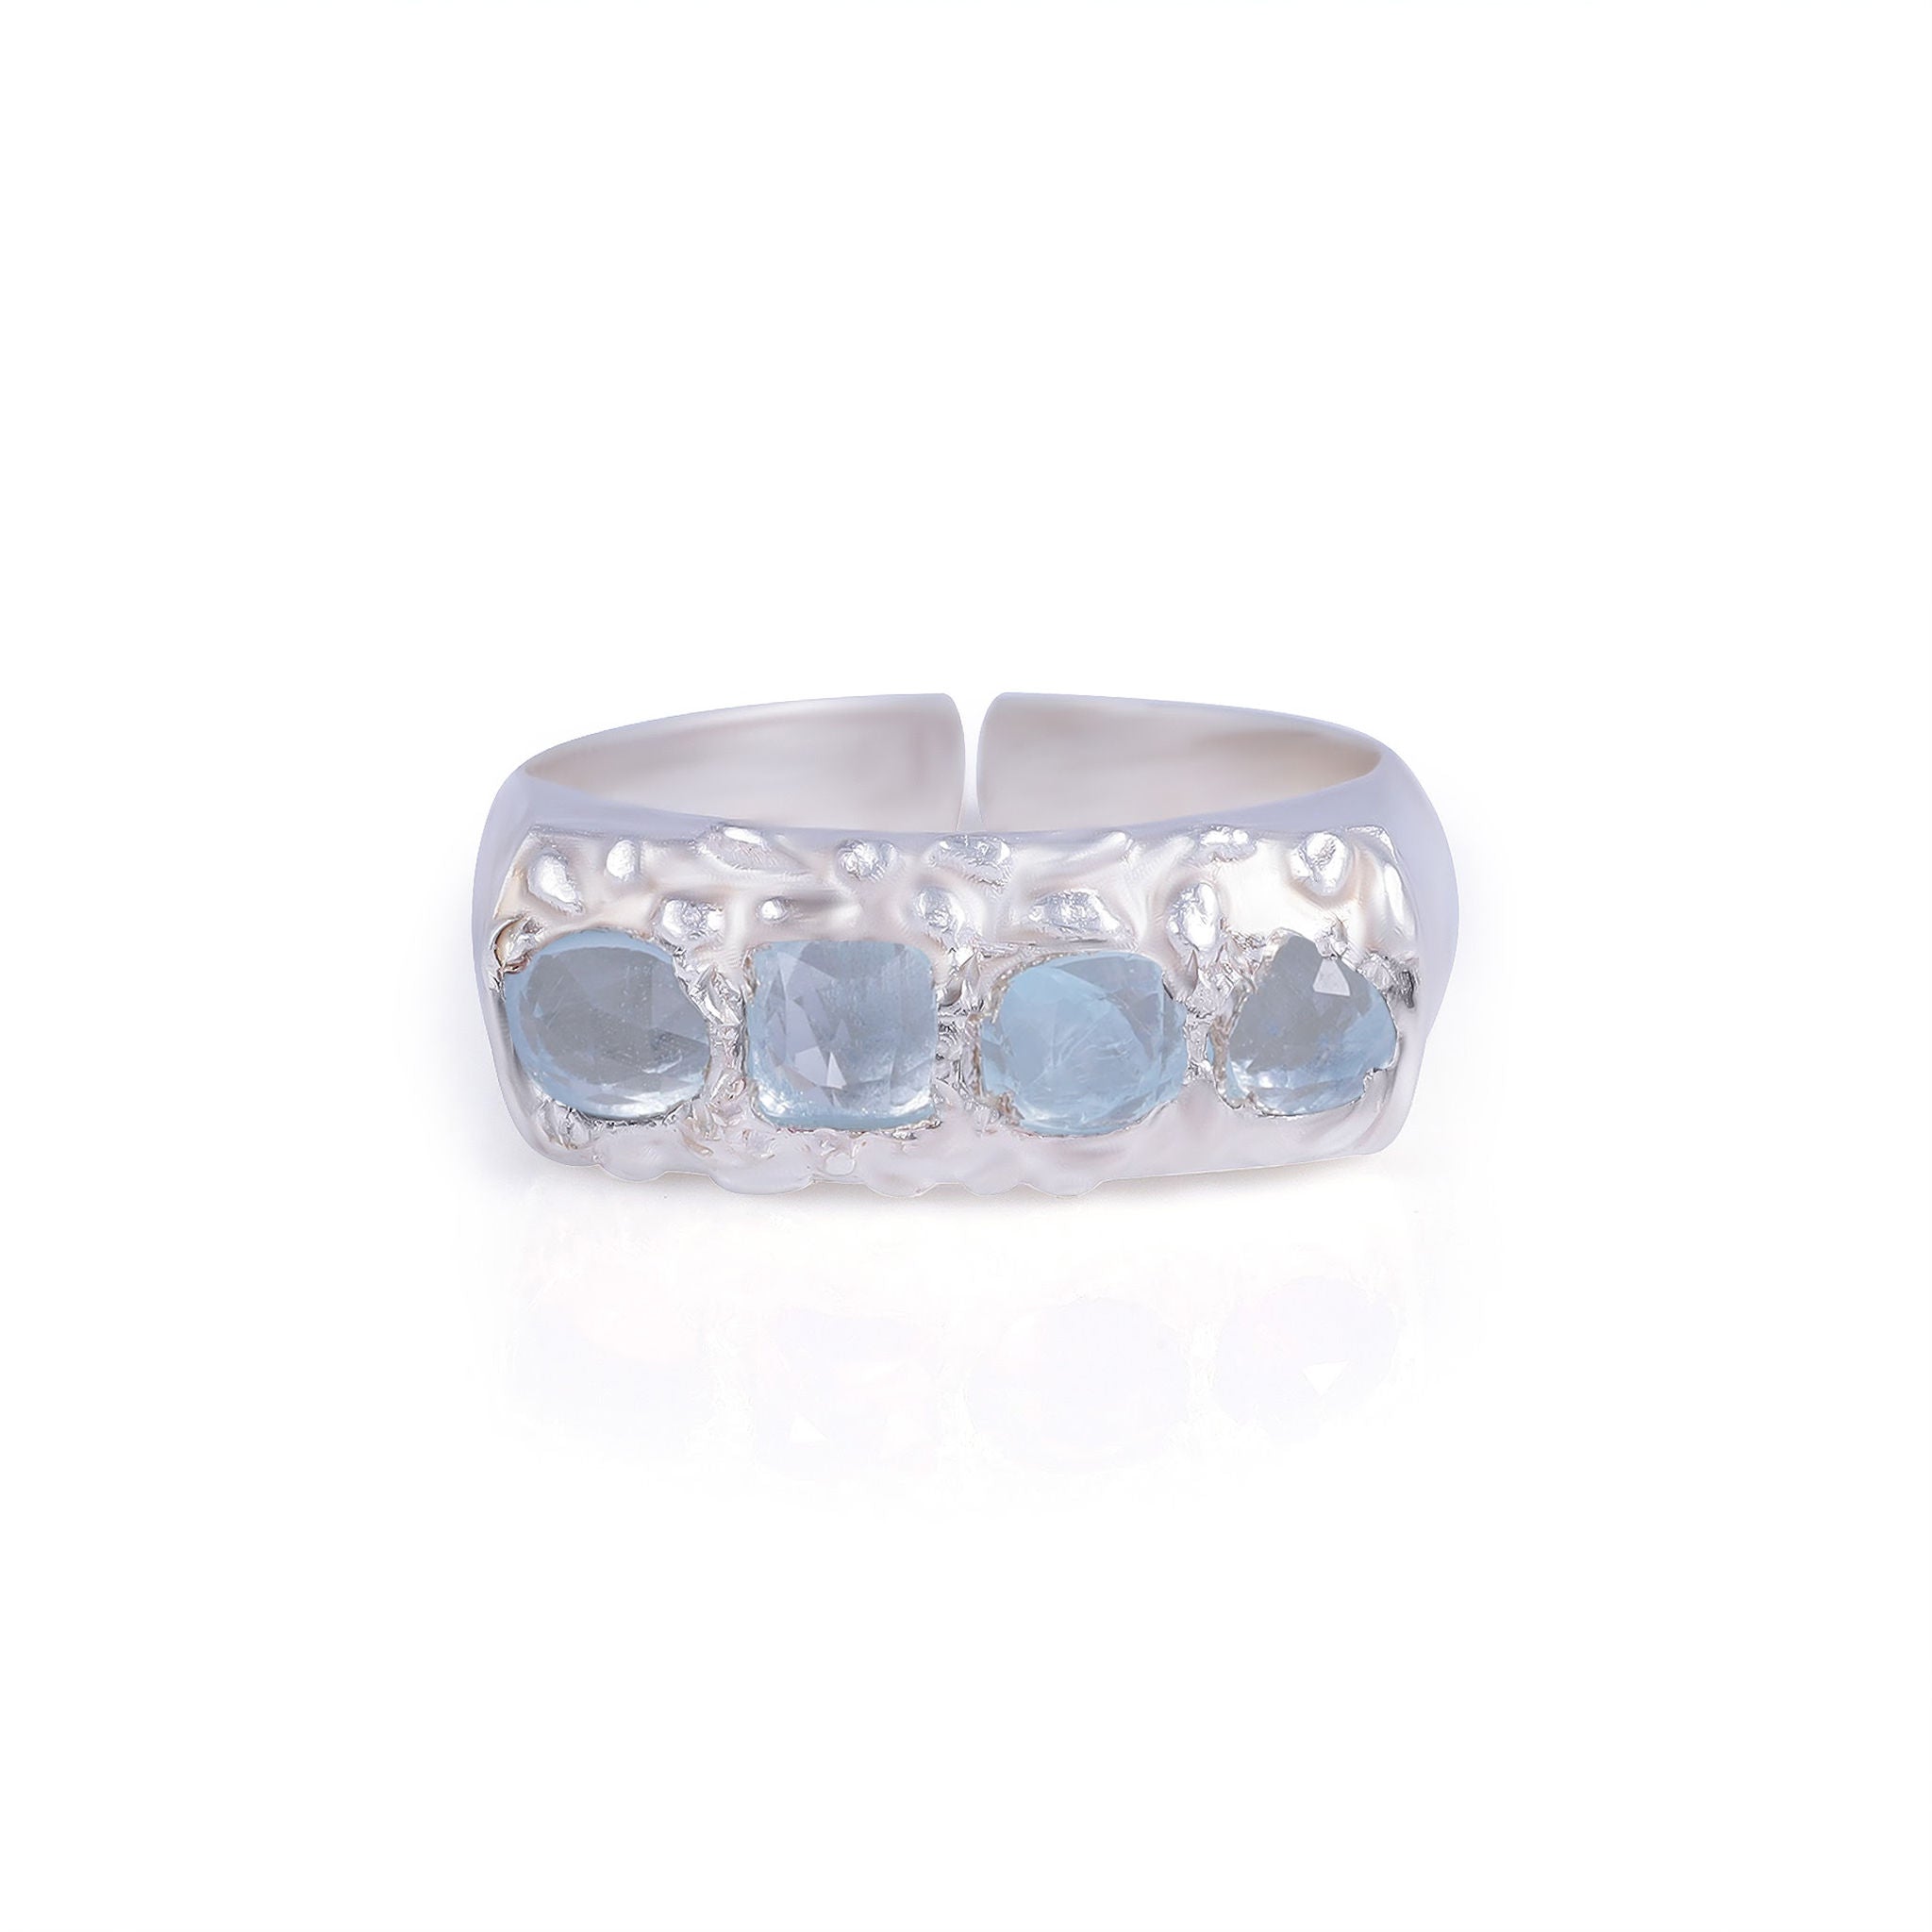 HumanKind Ring. Sky Blue Topaz. 925 Silver